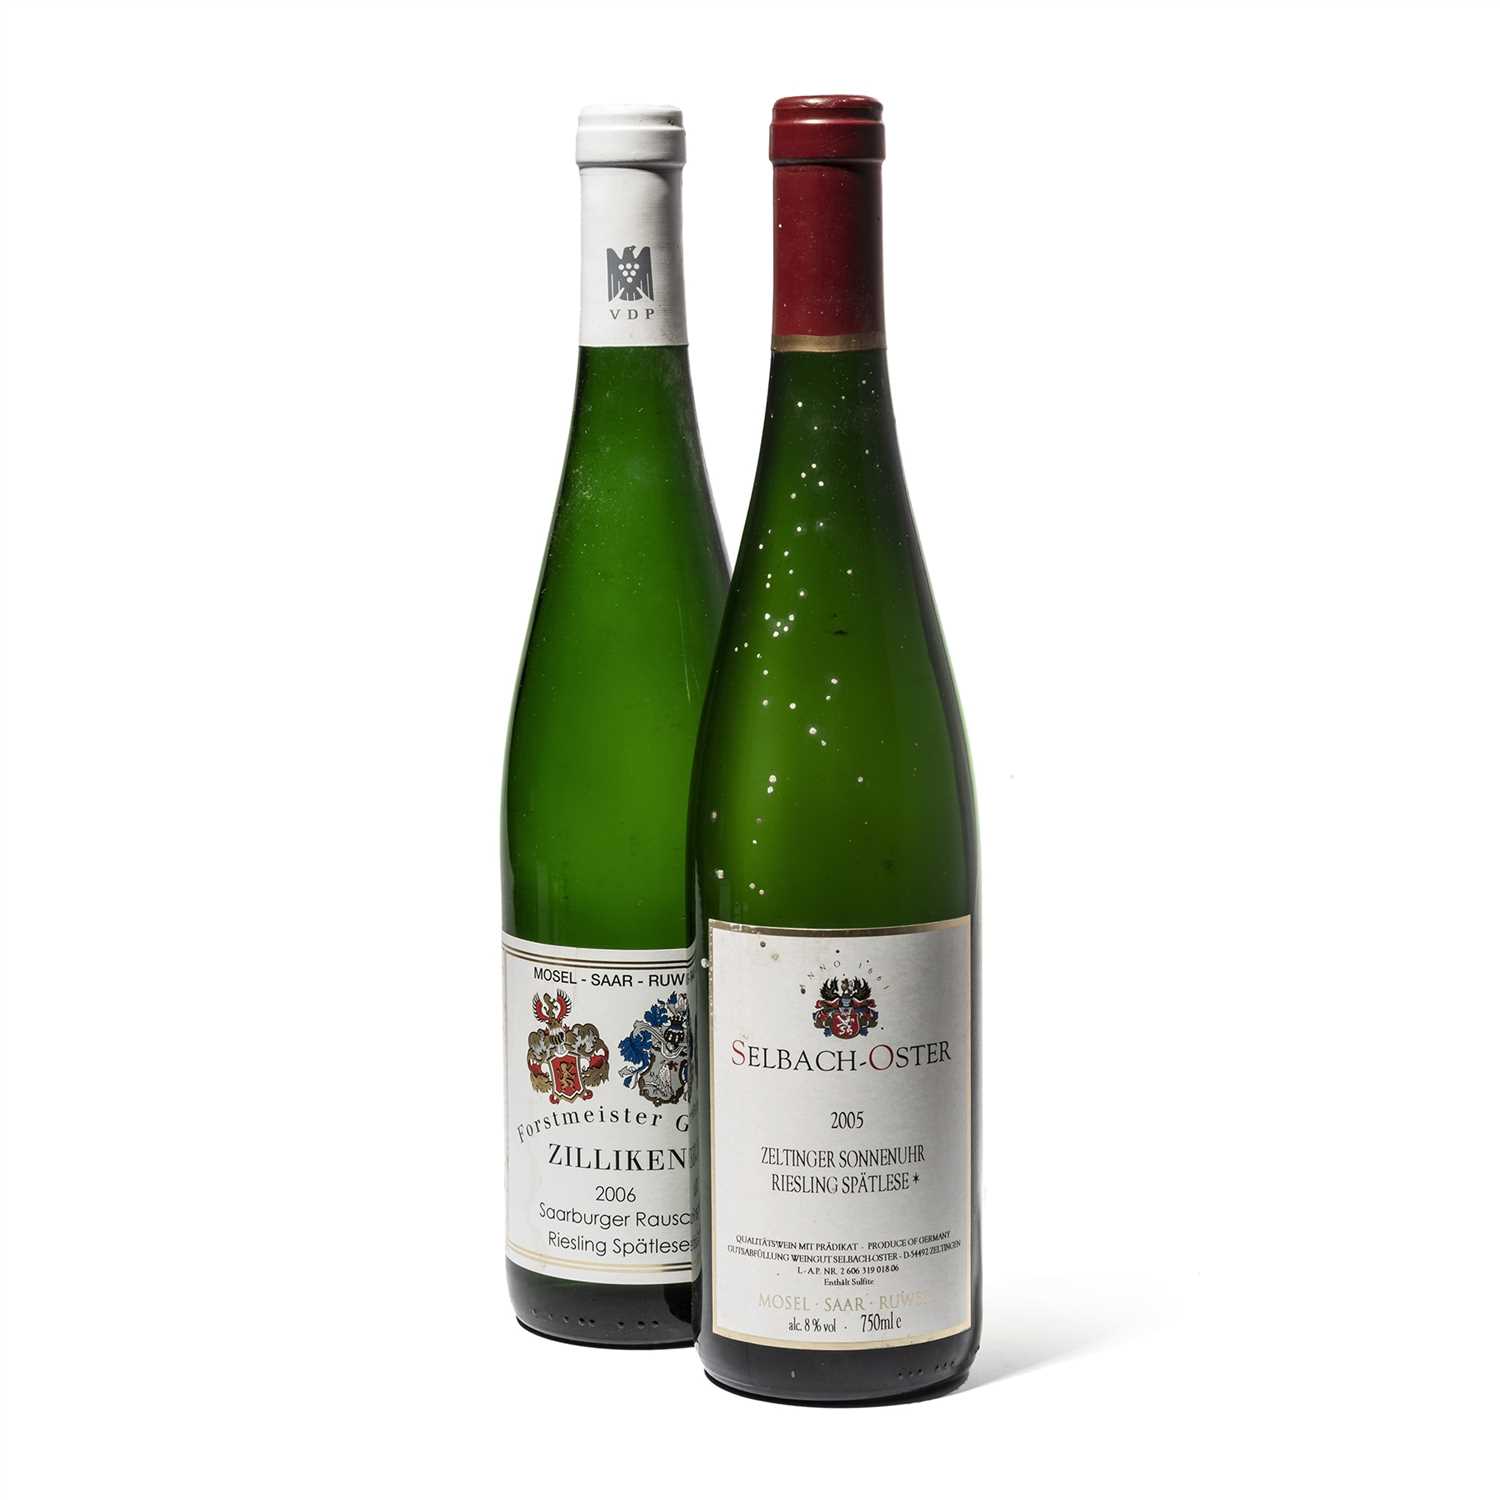 Lot 199 - Mixed Mosel Spatlese